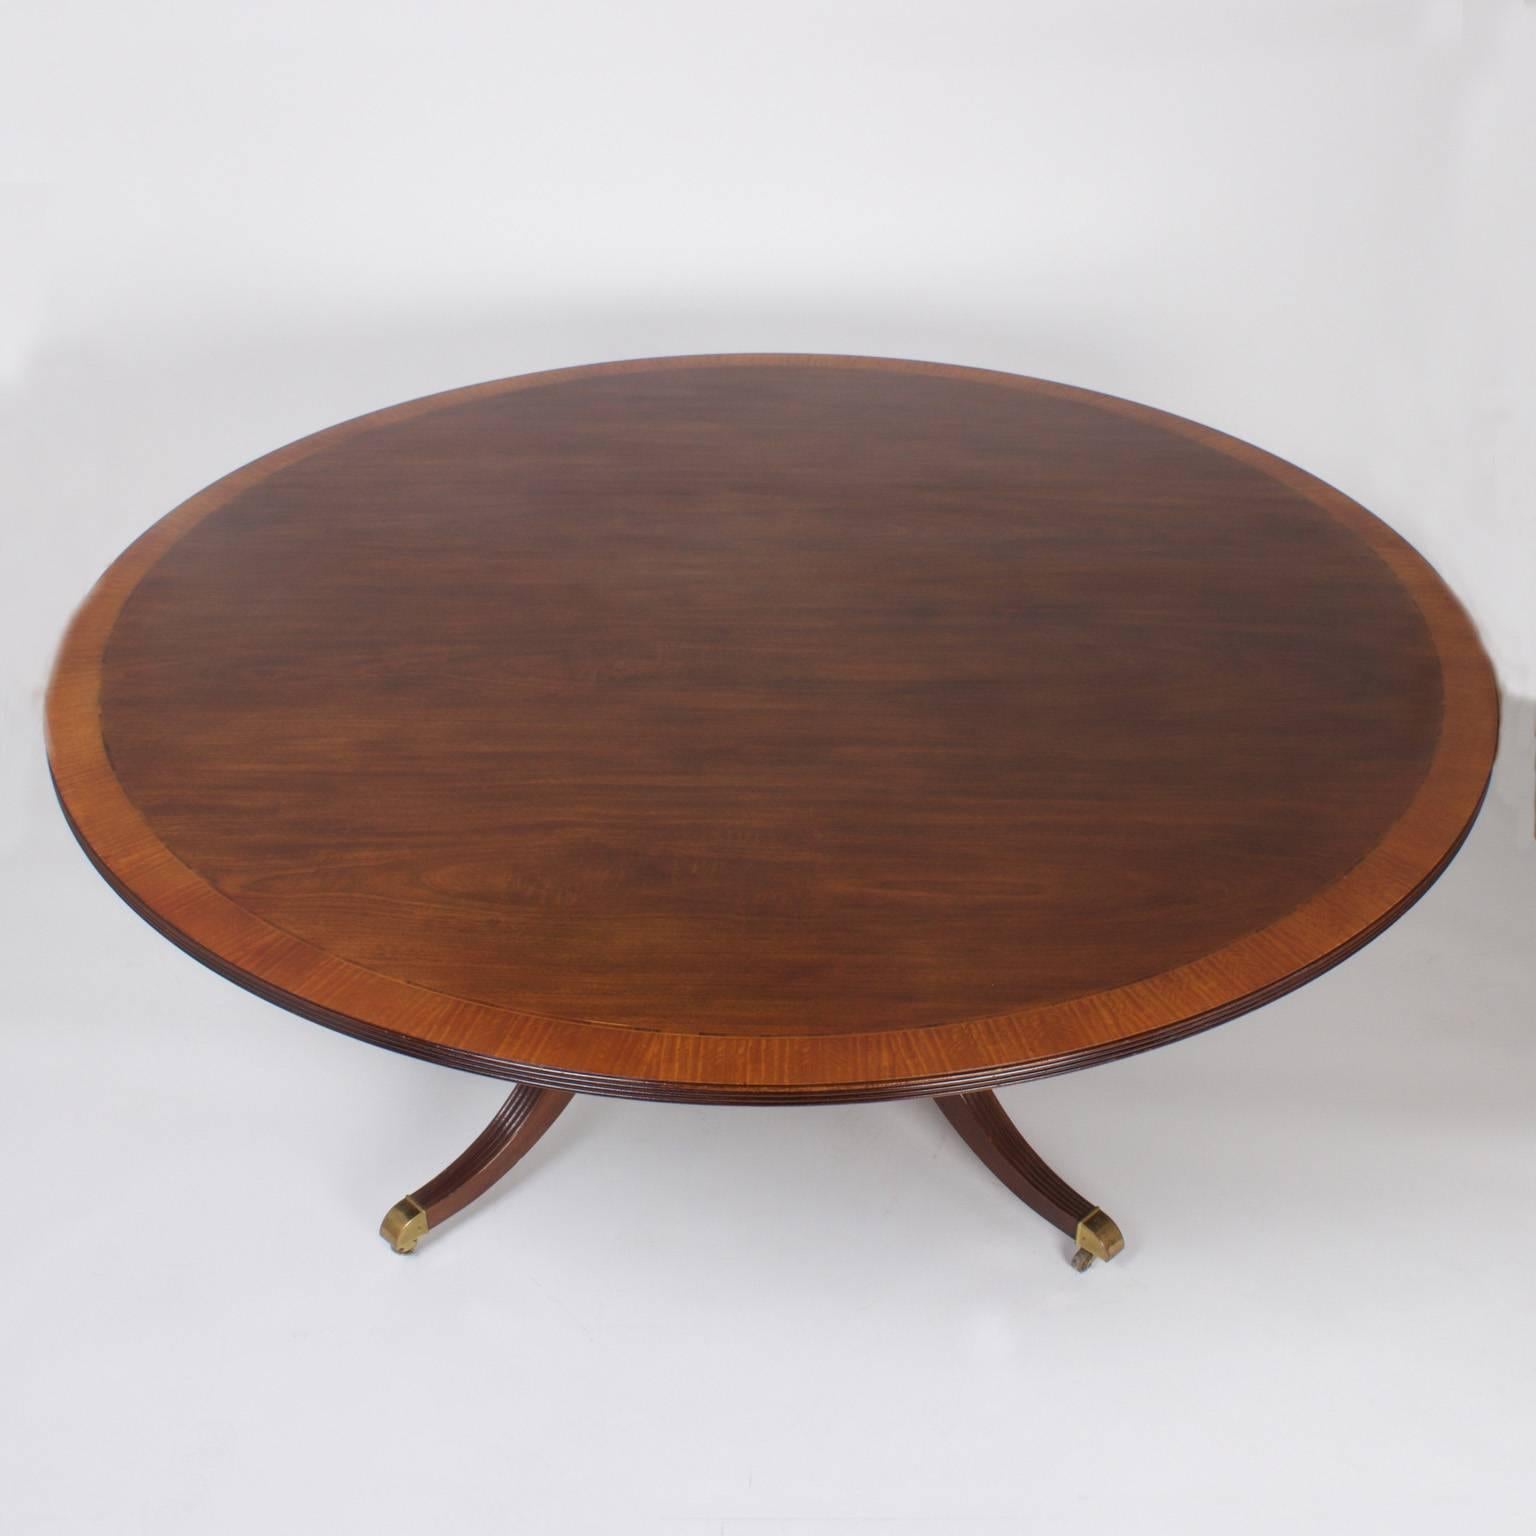 Handsome Mahogany round dining table with a cross banded inlaid top and a beaded edge. The pedestal base has a four column box on a plateau supported by four Duncan Fyfe style legs on brass feet and casters. Signed “Baker Collectors Edition” on the